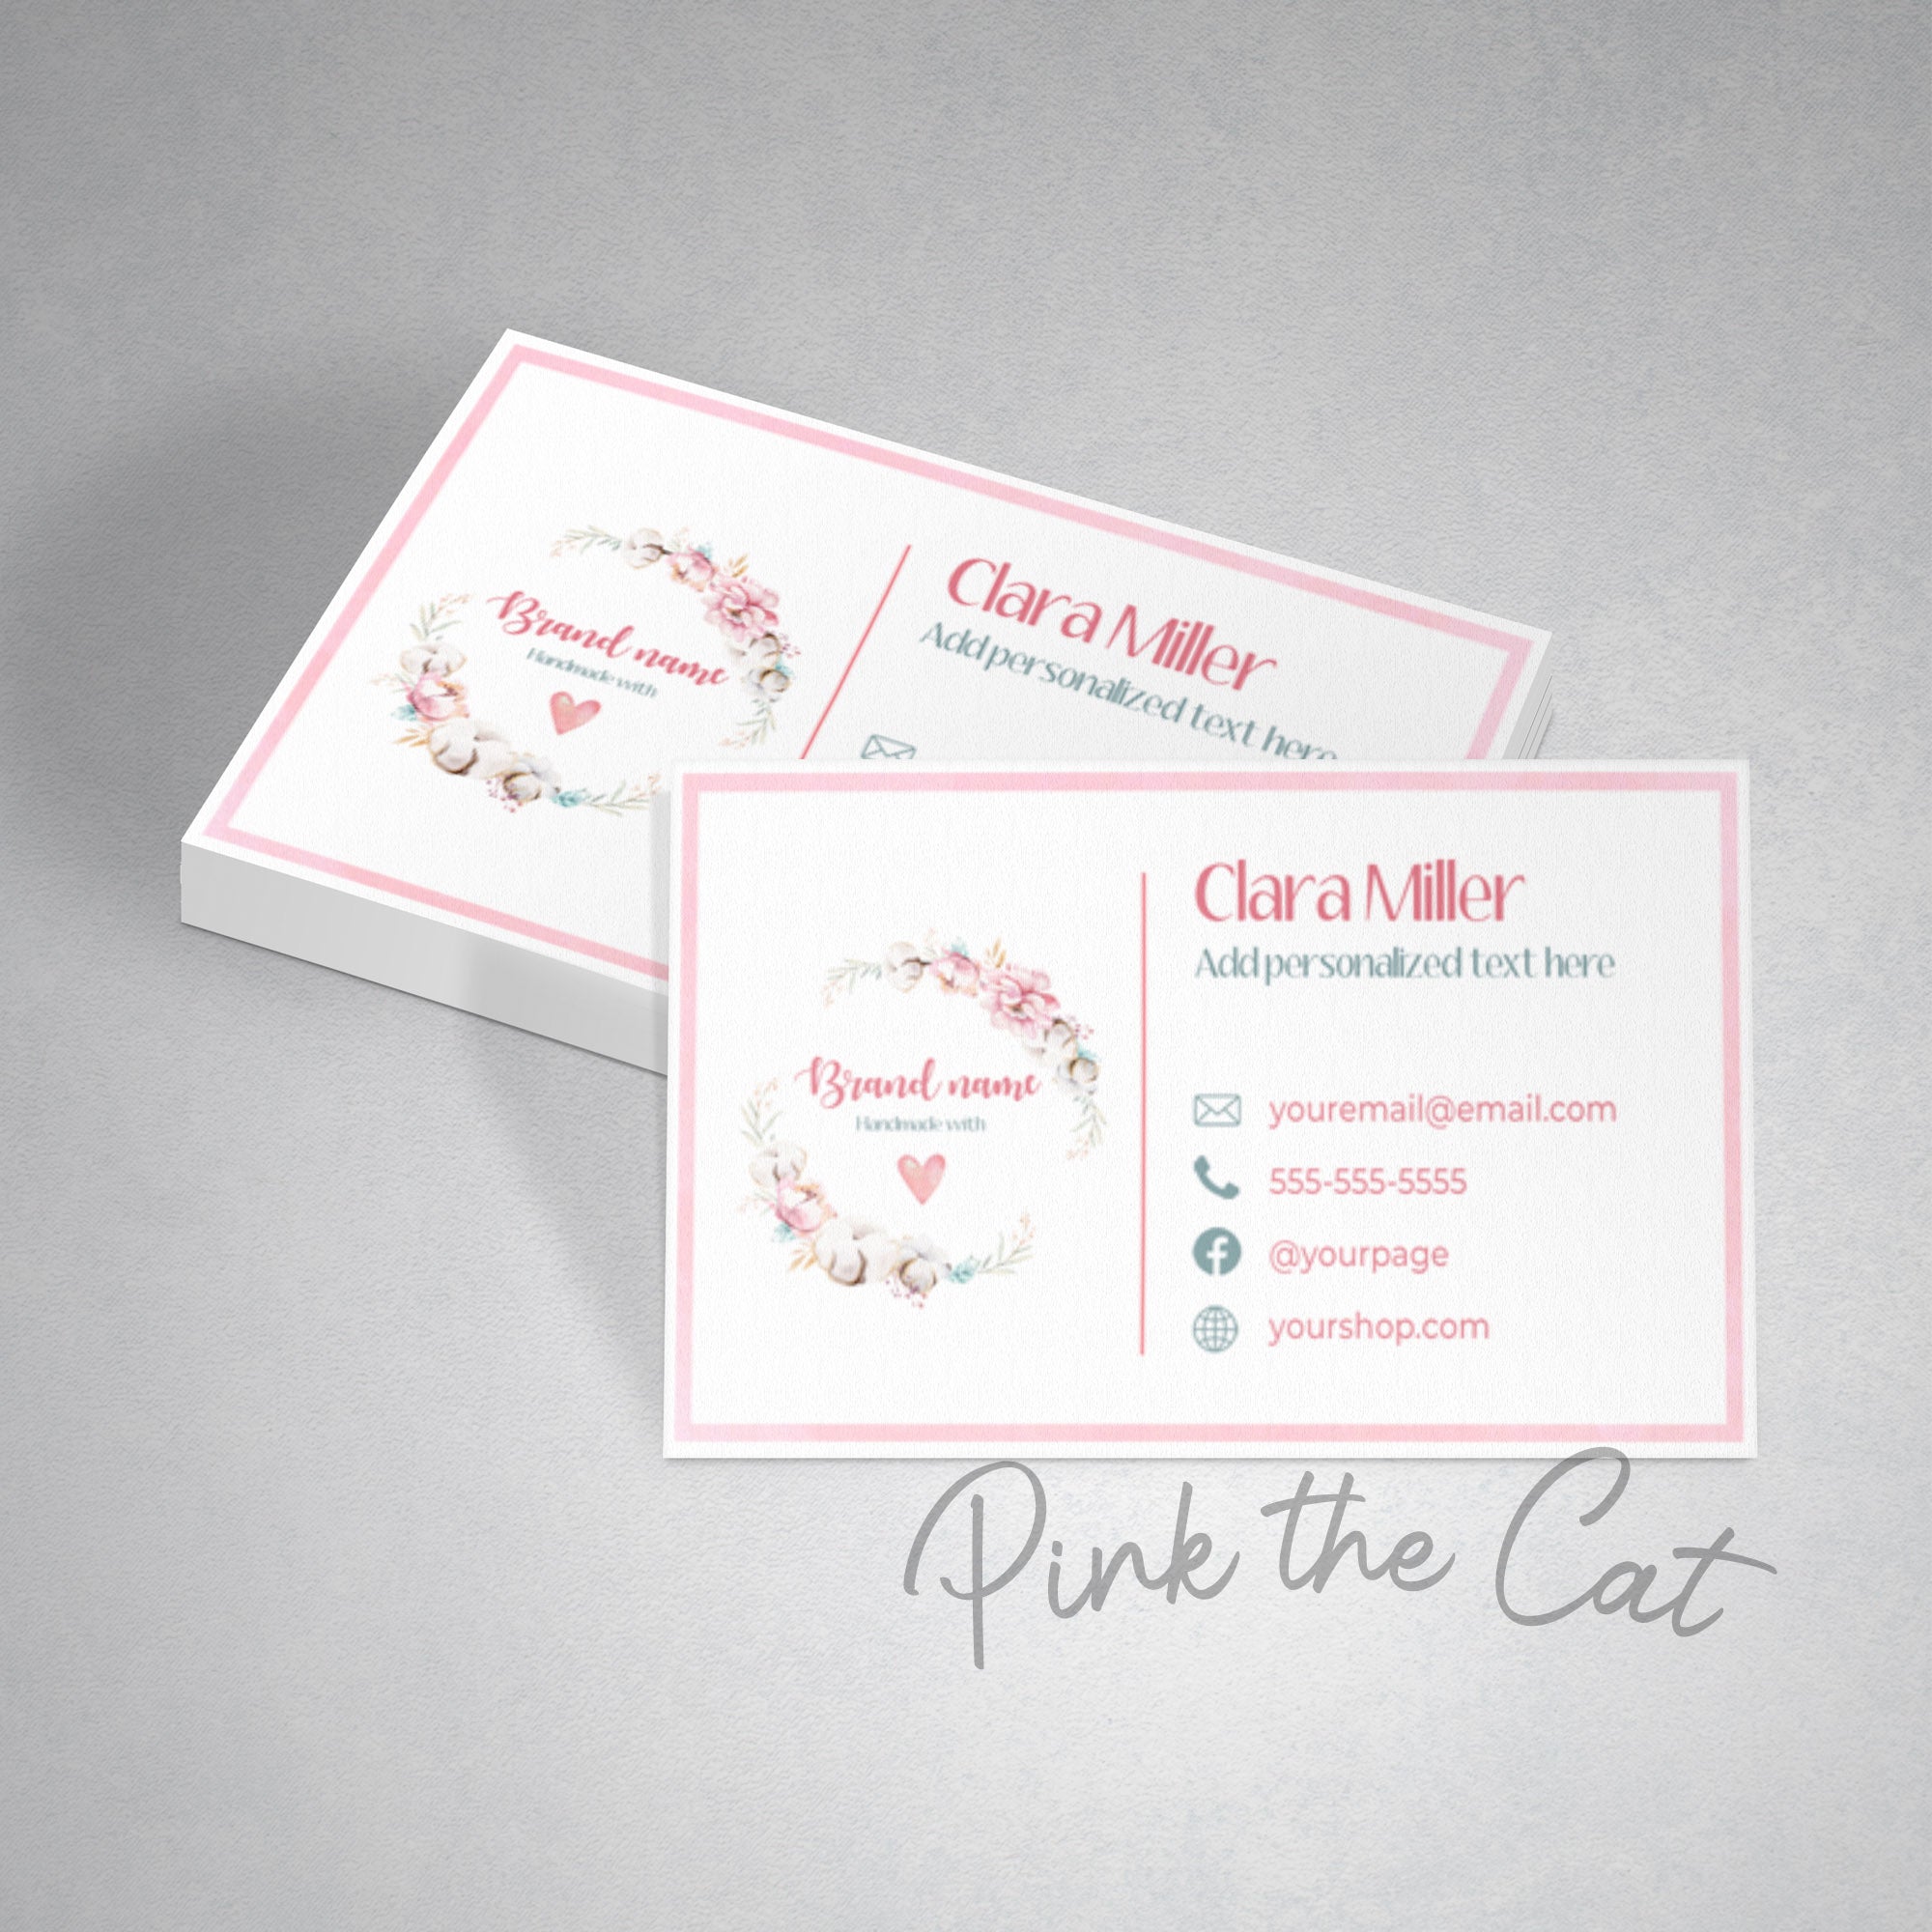 Floral business card wreath pink heart